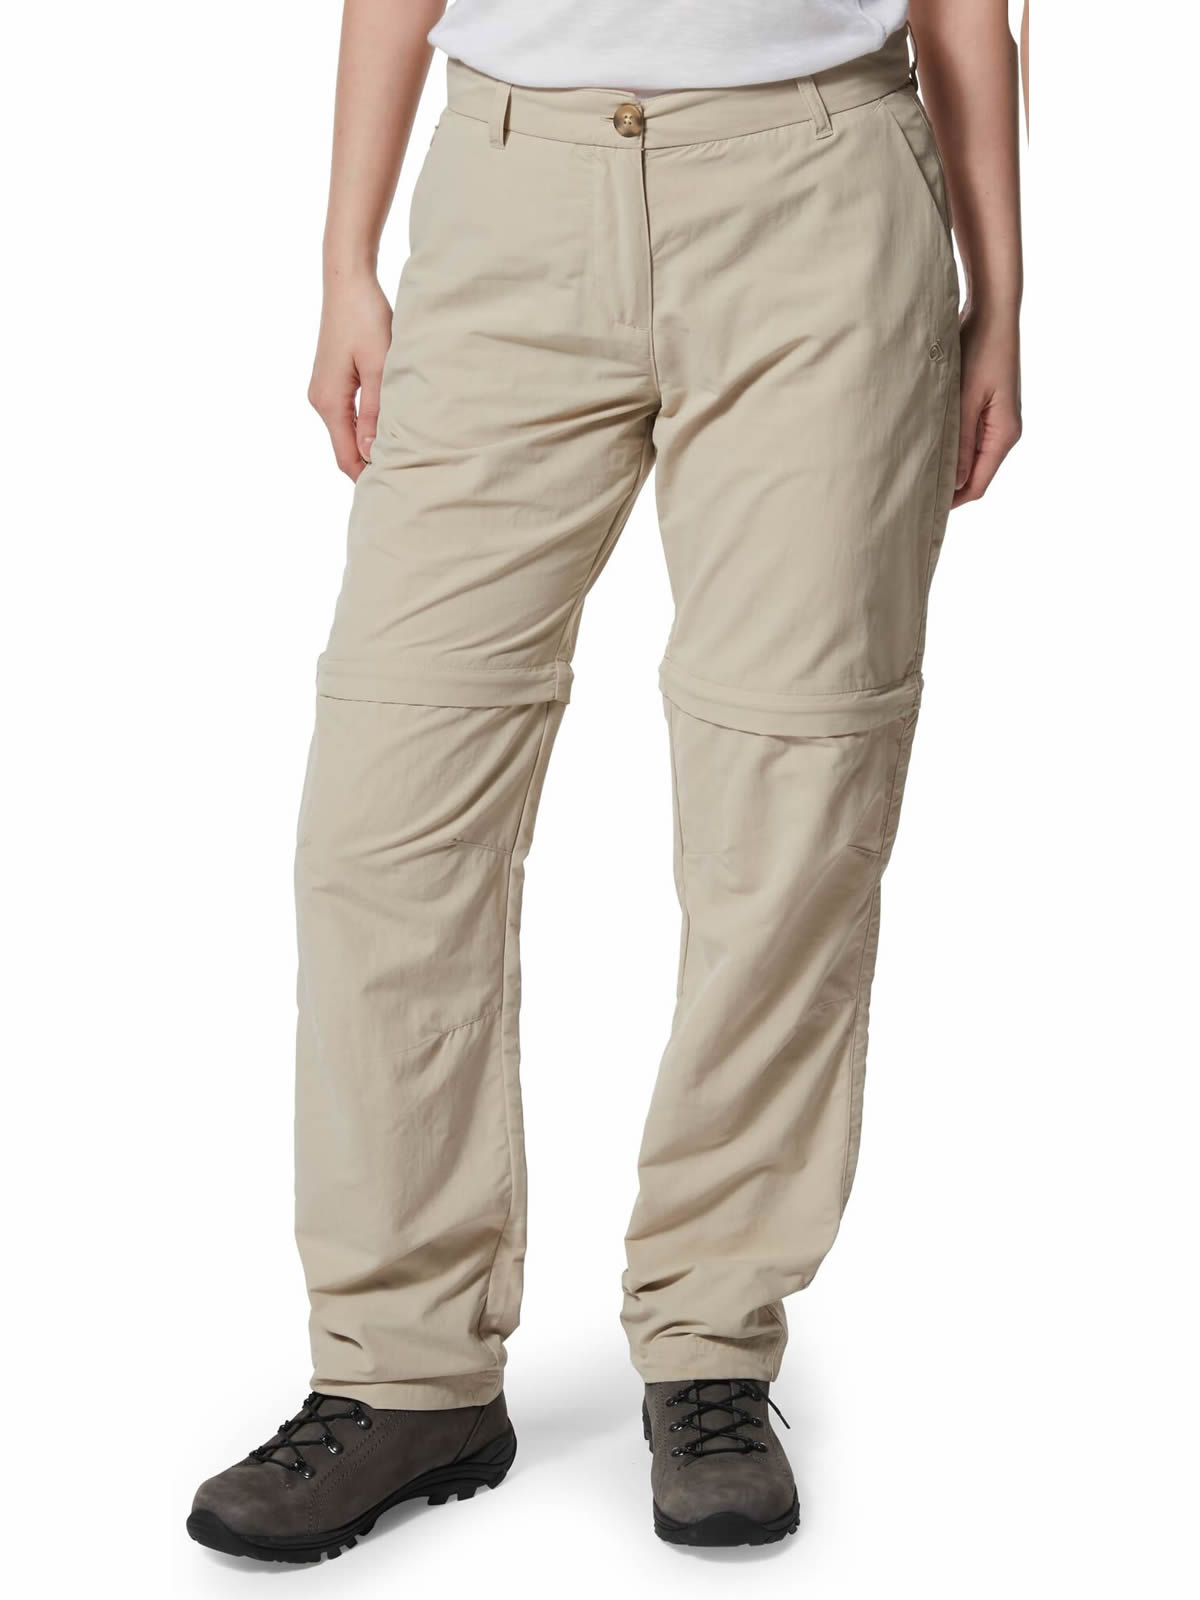 Craghoppers NosiLife III Ladies Convertible Trousers CWJ1214